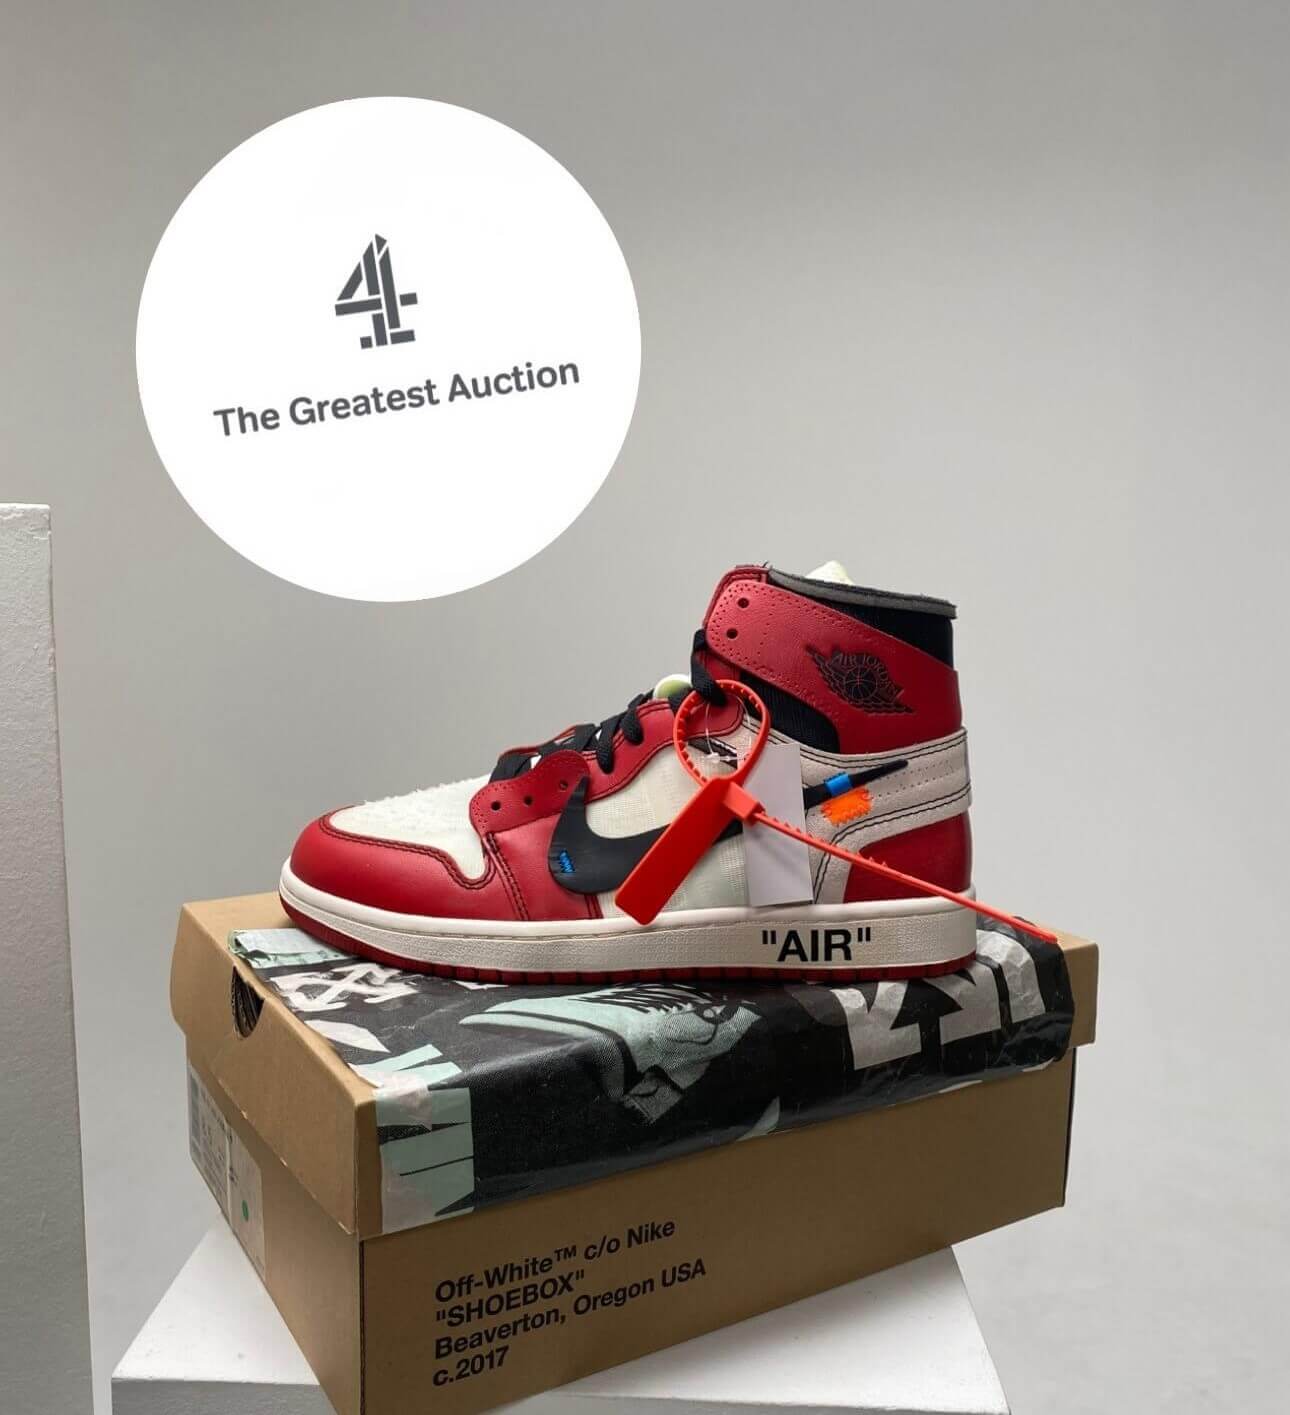 Off-White Sneakers Go Under Auction on 'The Greatest Auction' Channel 4